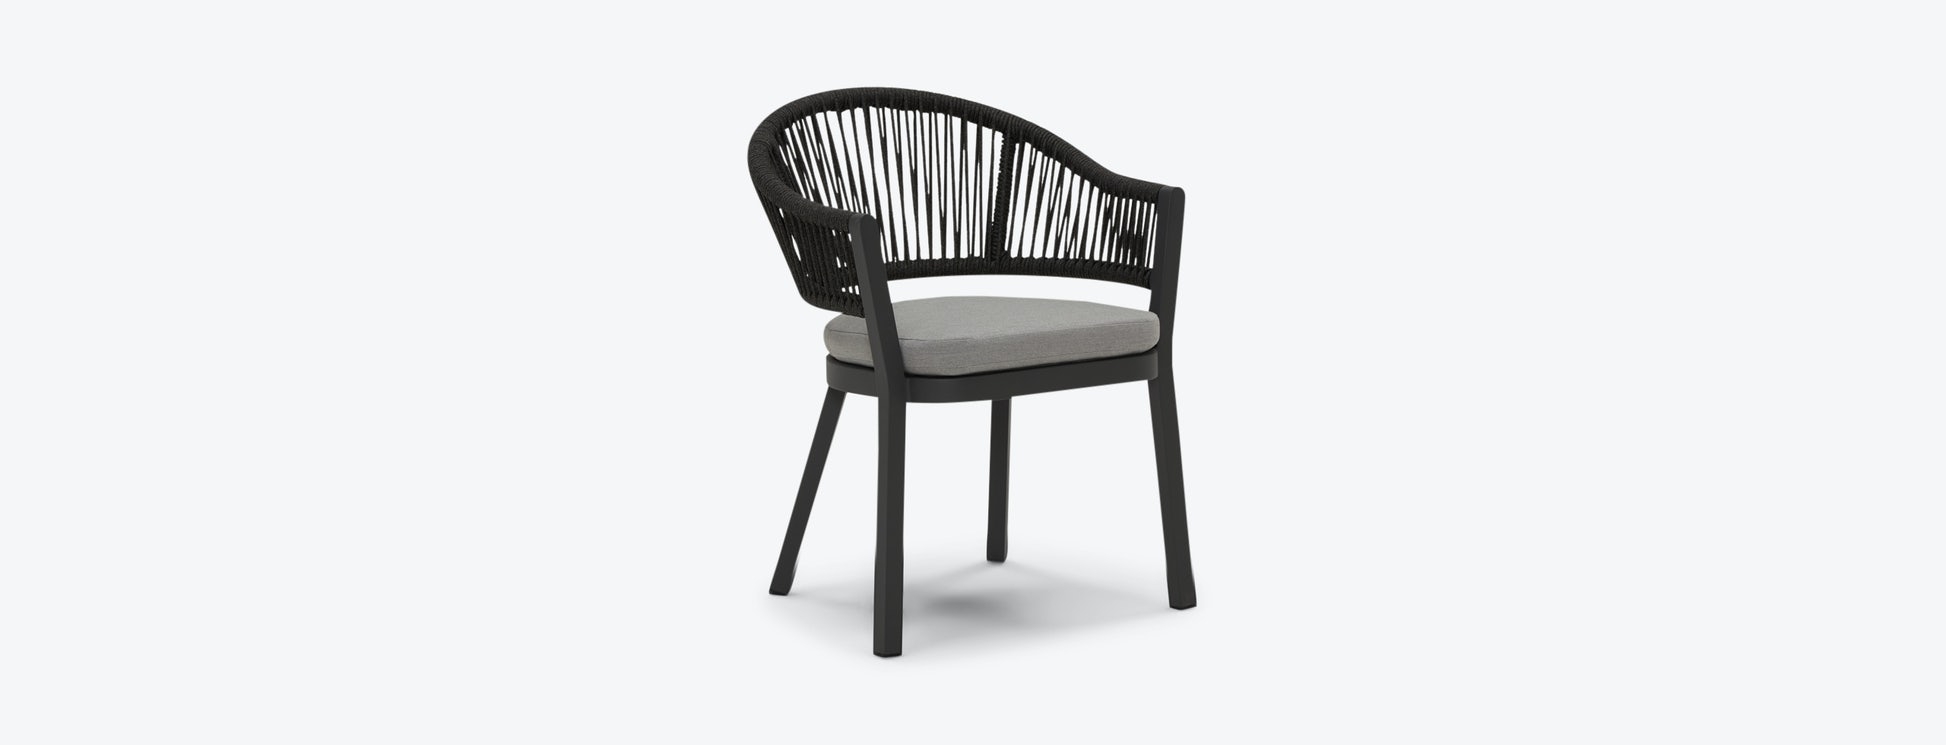 Catalina Outdoor Dining Chair (Set of 2) - Image 0